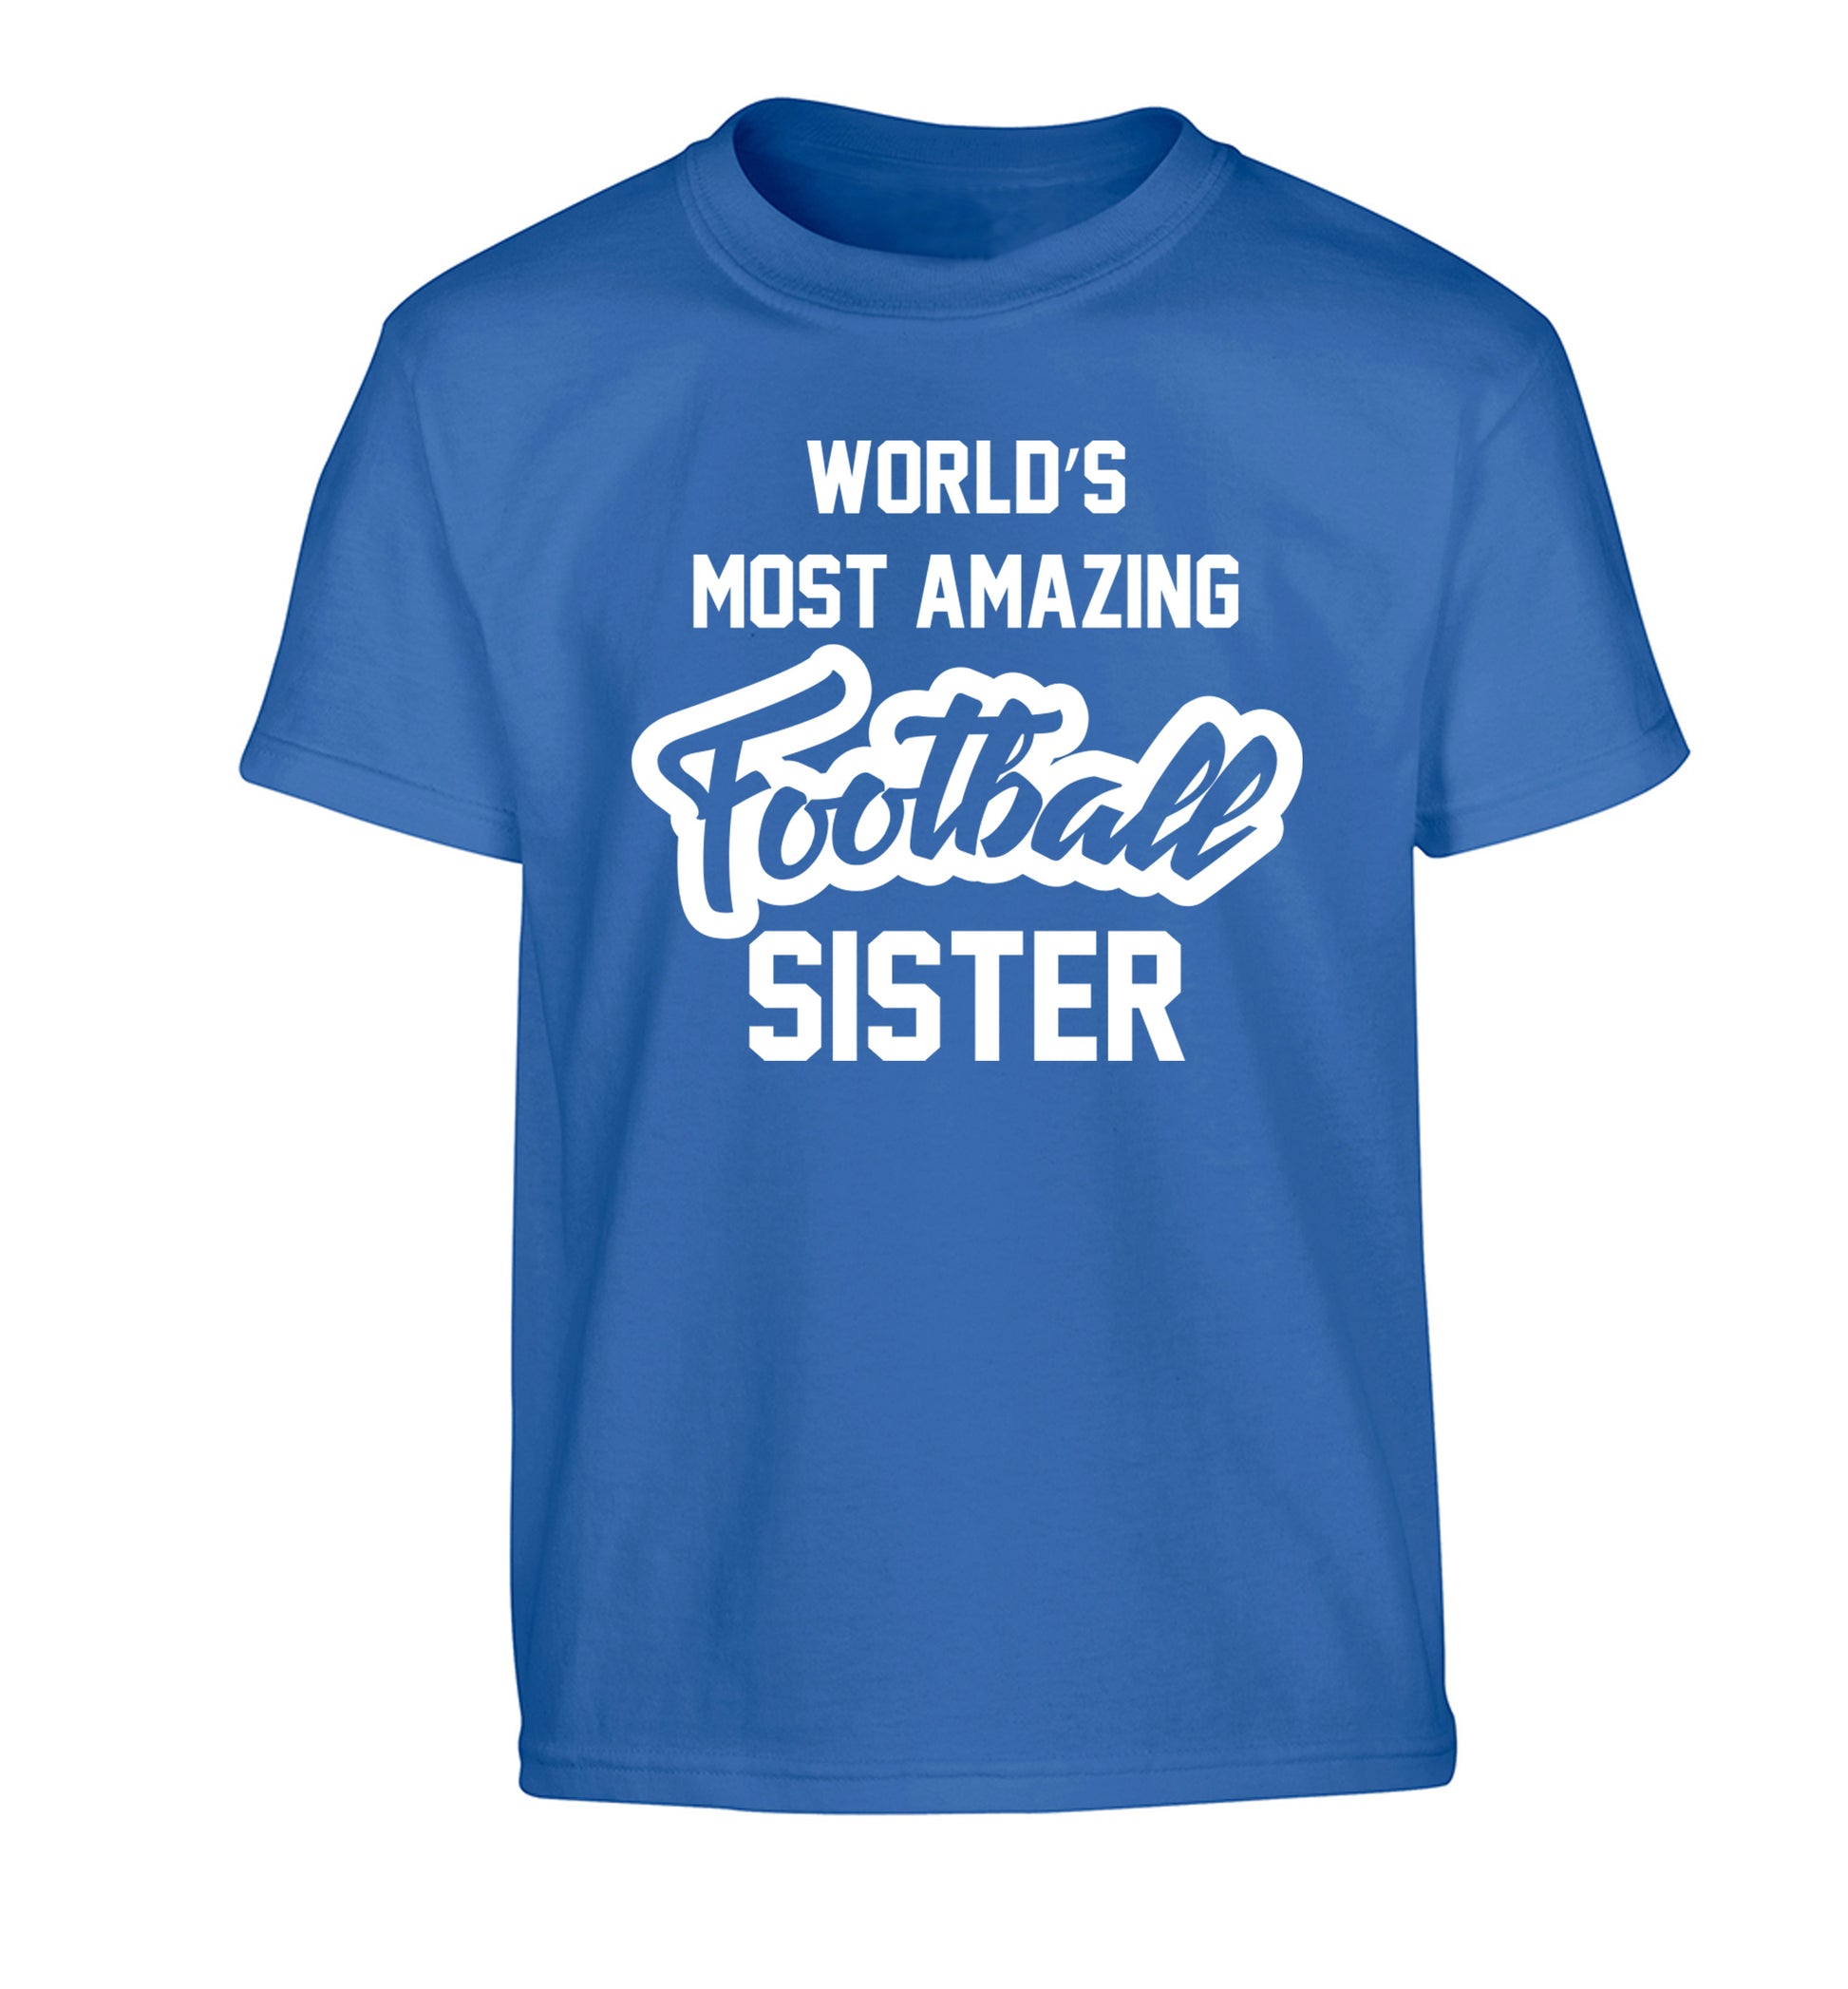 Worlds most amazing football sister Children's blue Tshirt 12-14 Years